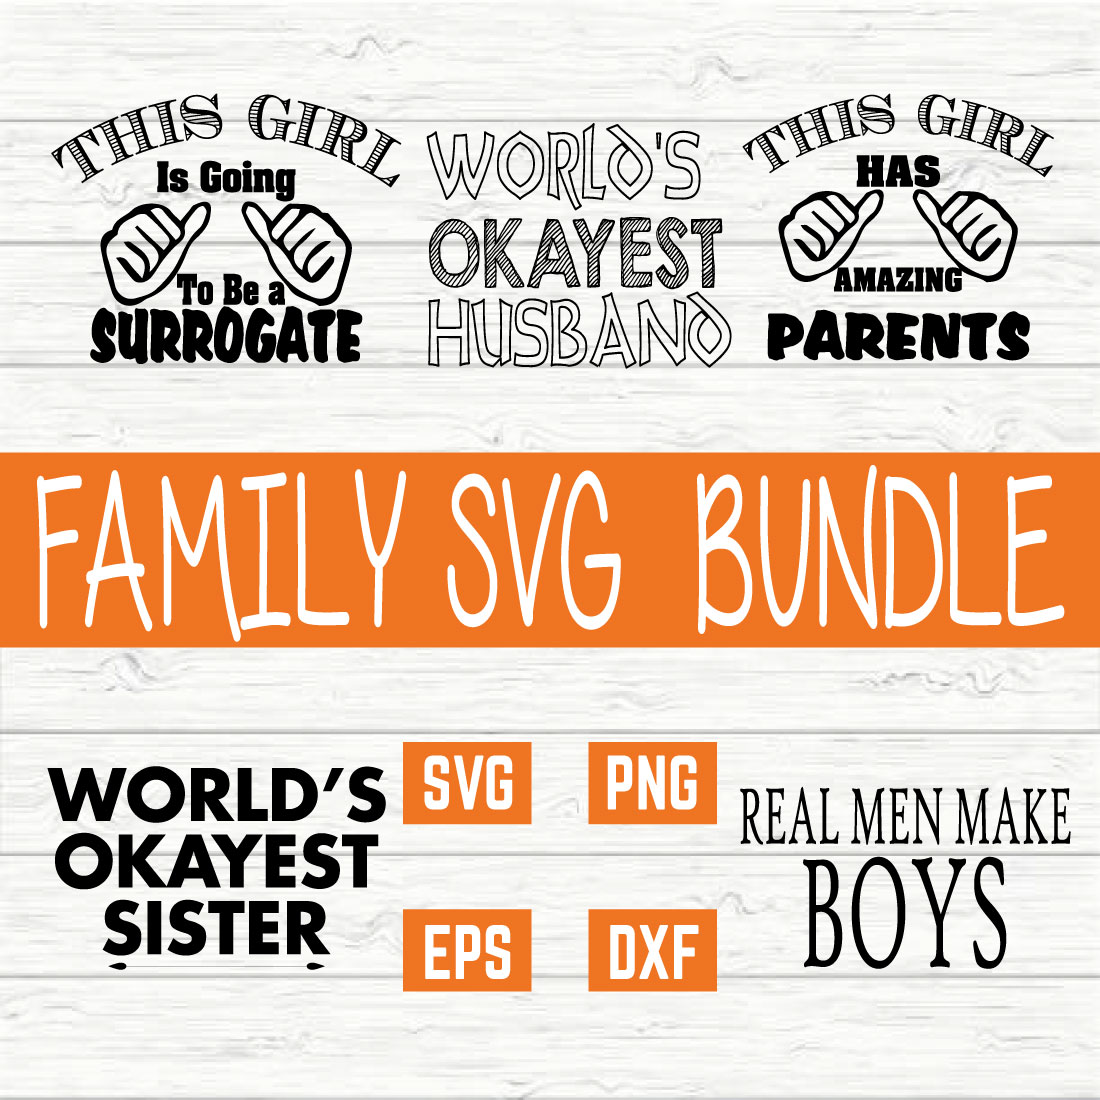 Family Typography Design Bundle vol 24 cover image.